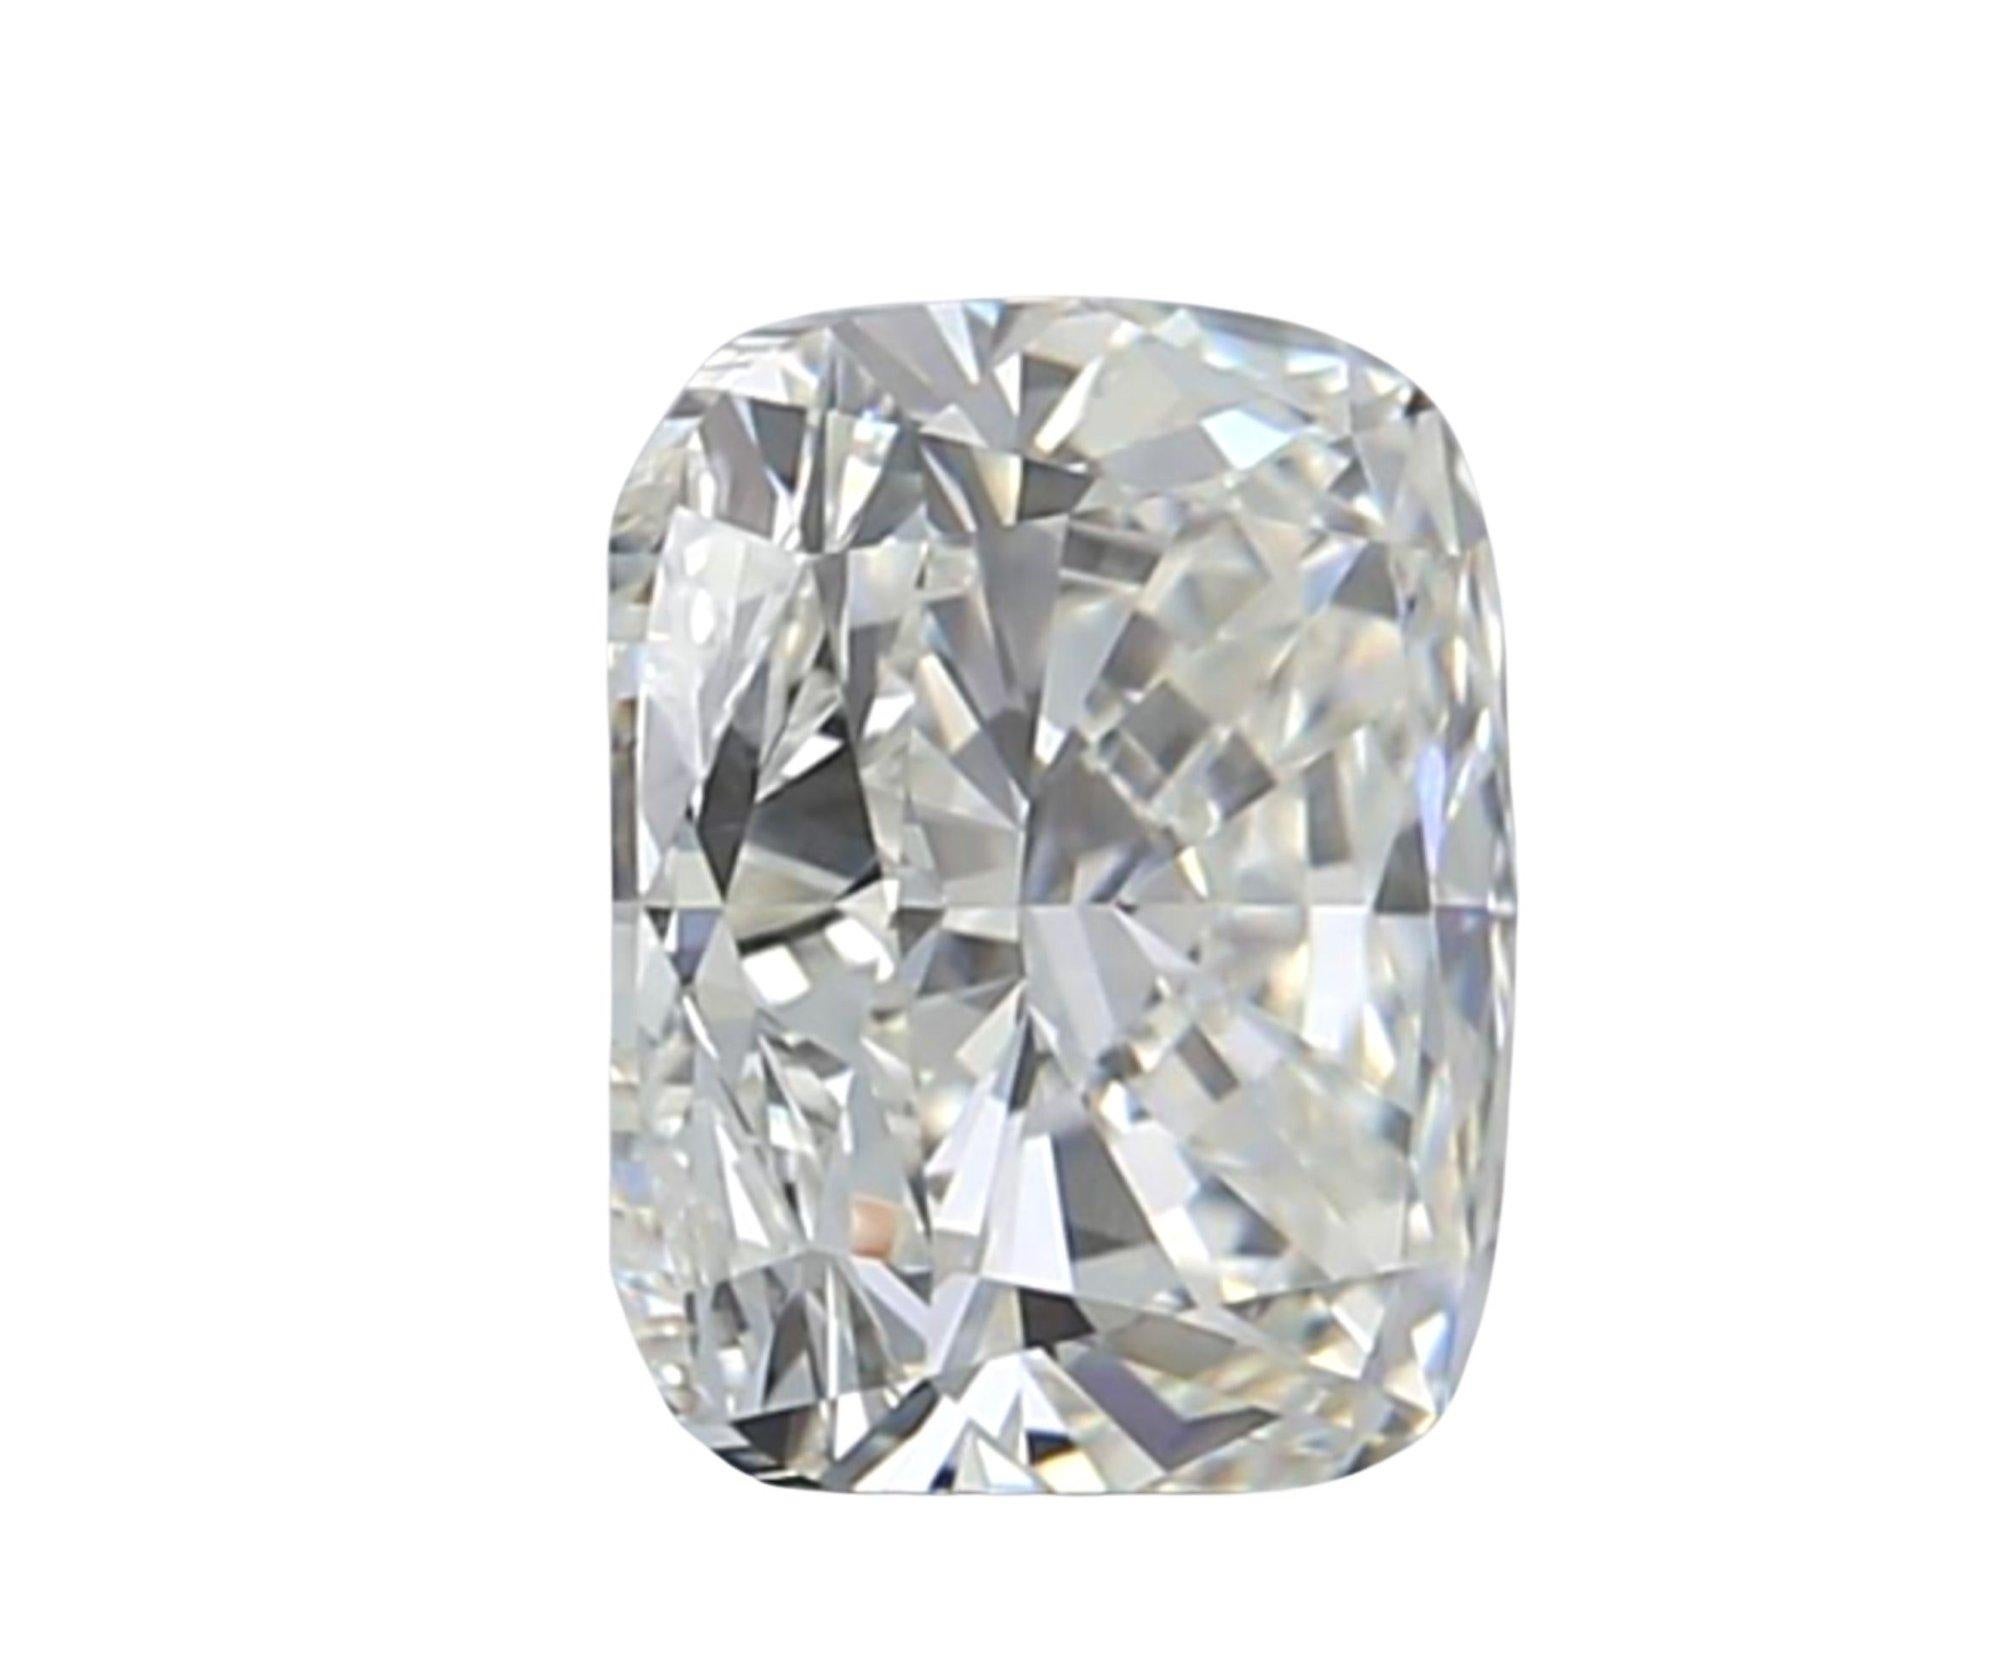 Ideal and natural cushion diamond in a 1.01 carat H IF graded by IGI Laboratory with Excellent cut. This diamond comes with an IGI Certificate sealed in a security Blister and laser inscription number.

IGI 528204677

Sku: JM-141